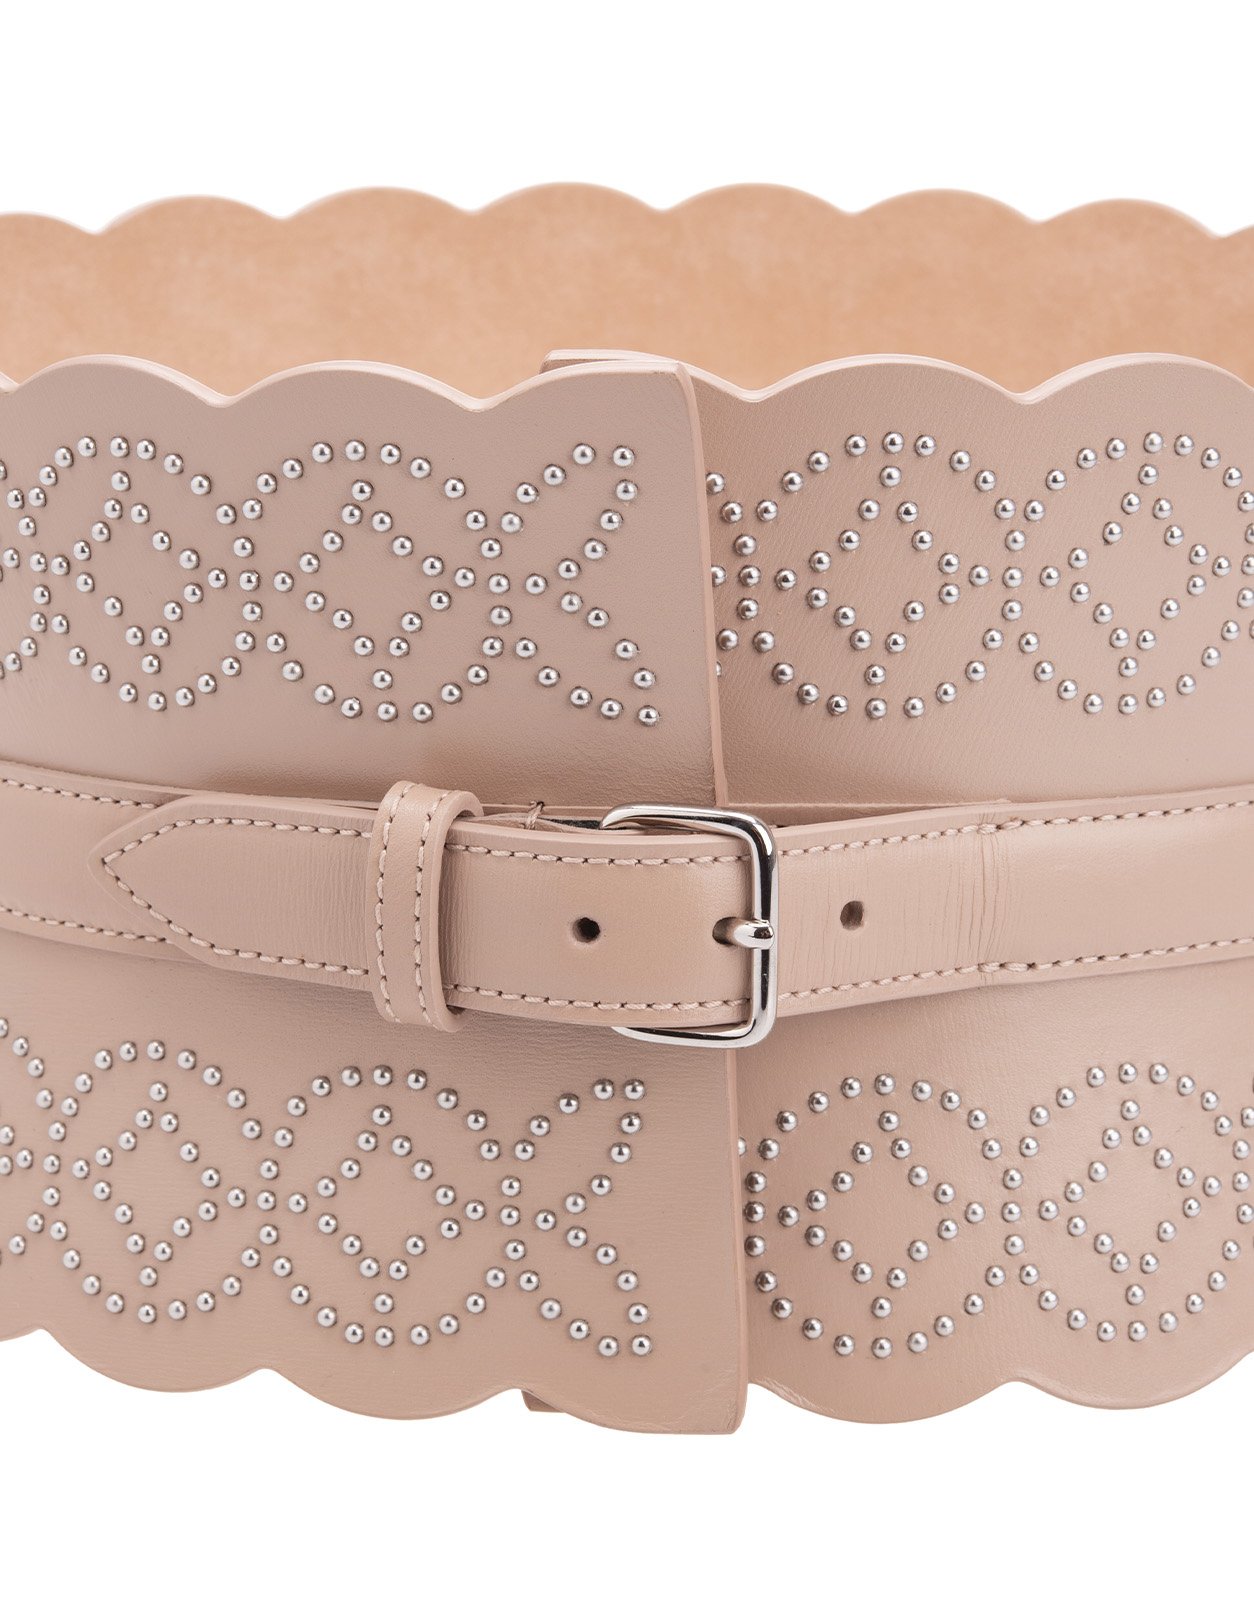 Pinkish Beige Perforated Leather Corset Belt With Geometric Pattern Of  Micro Studs